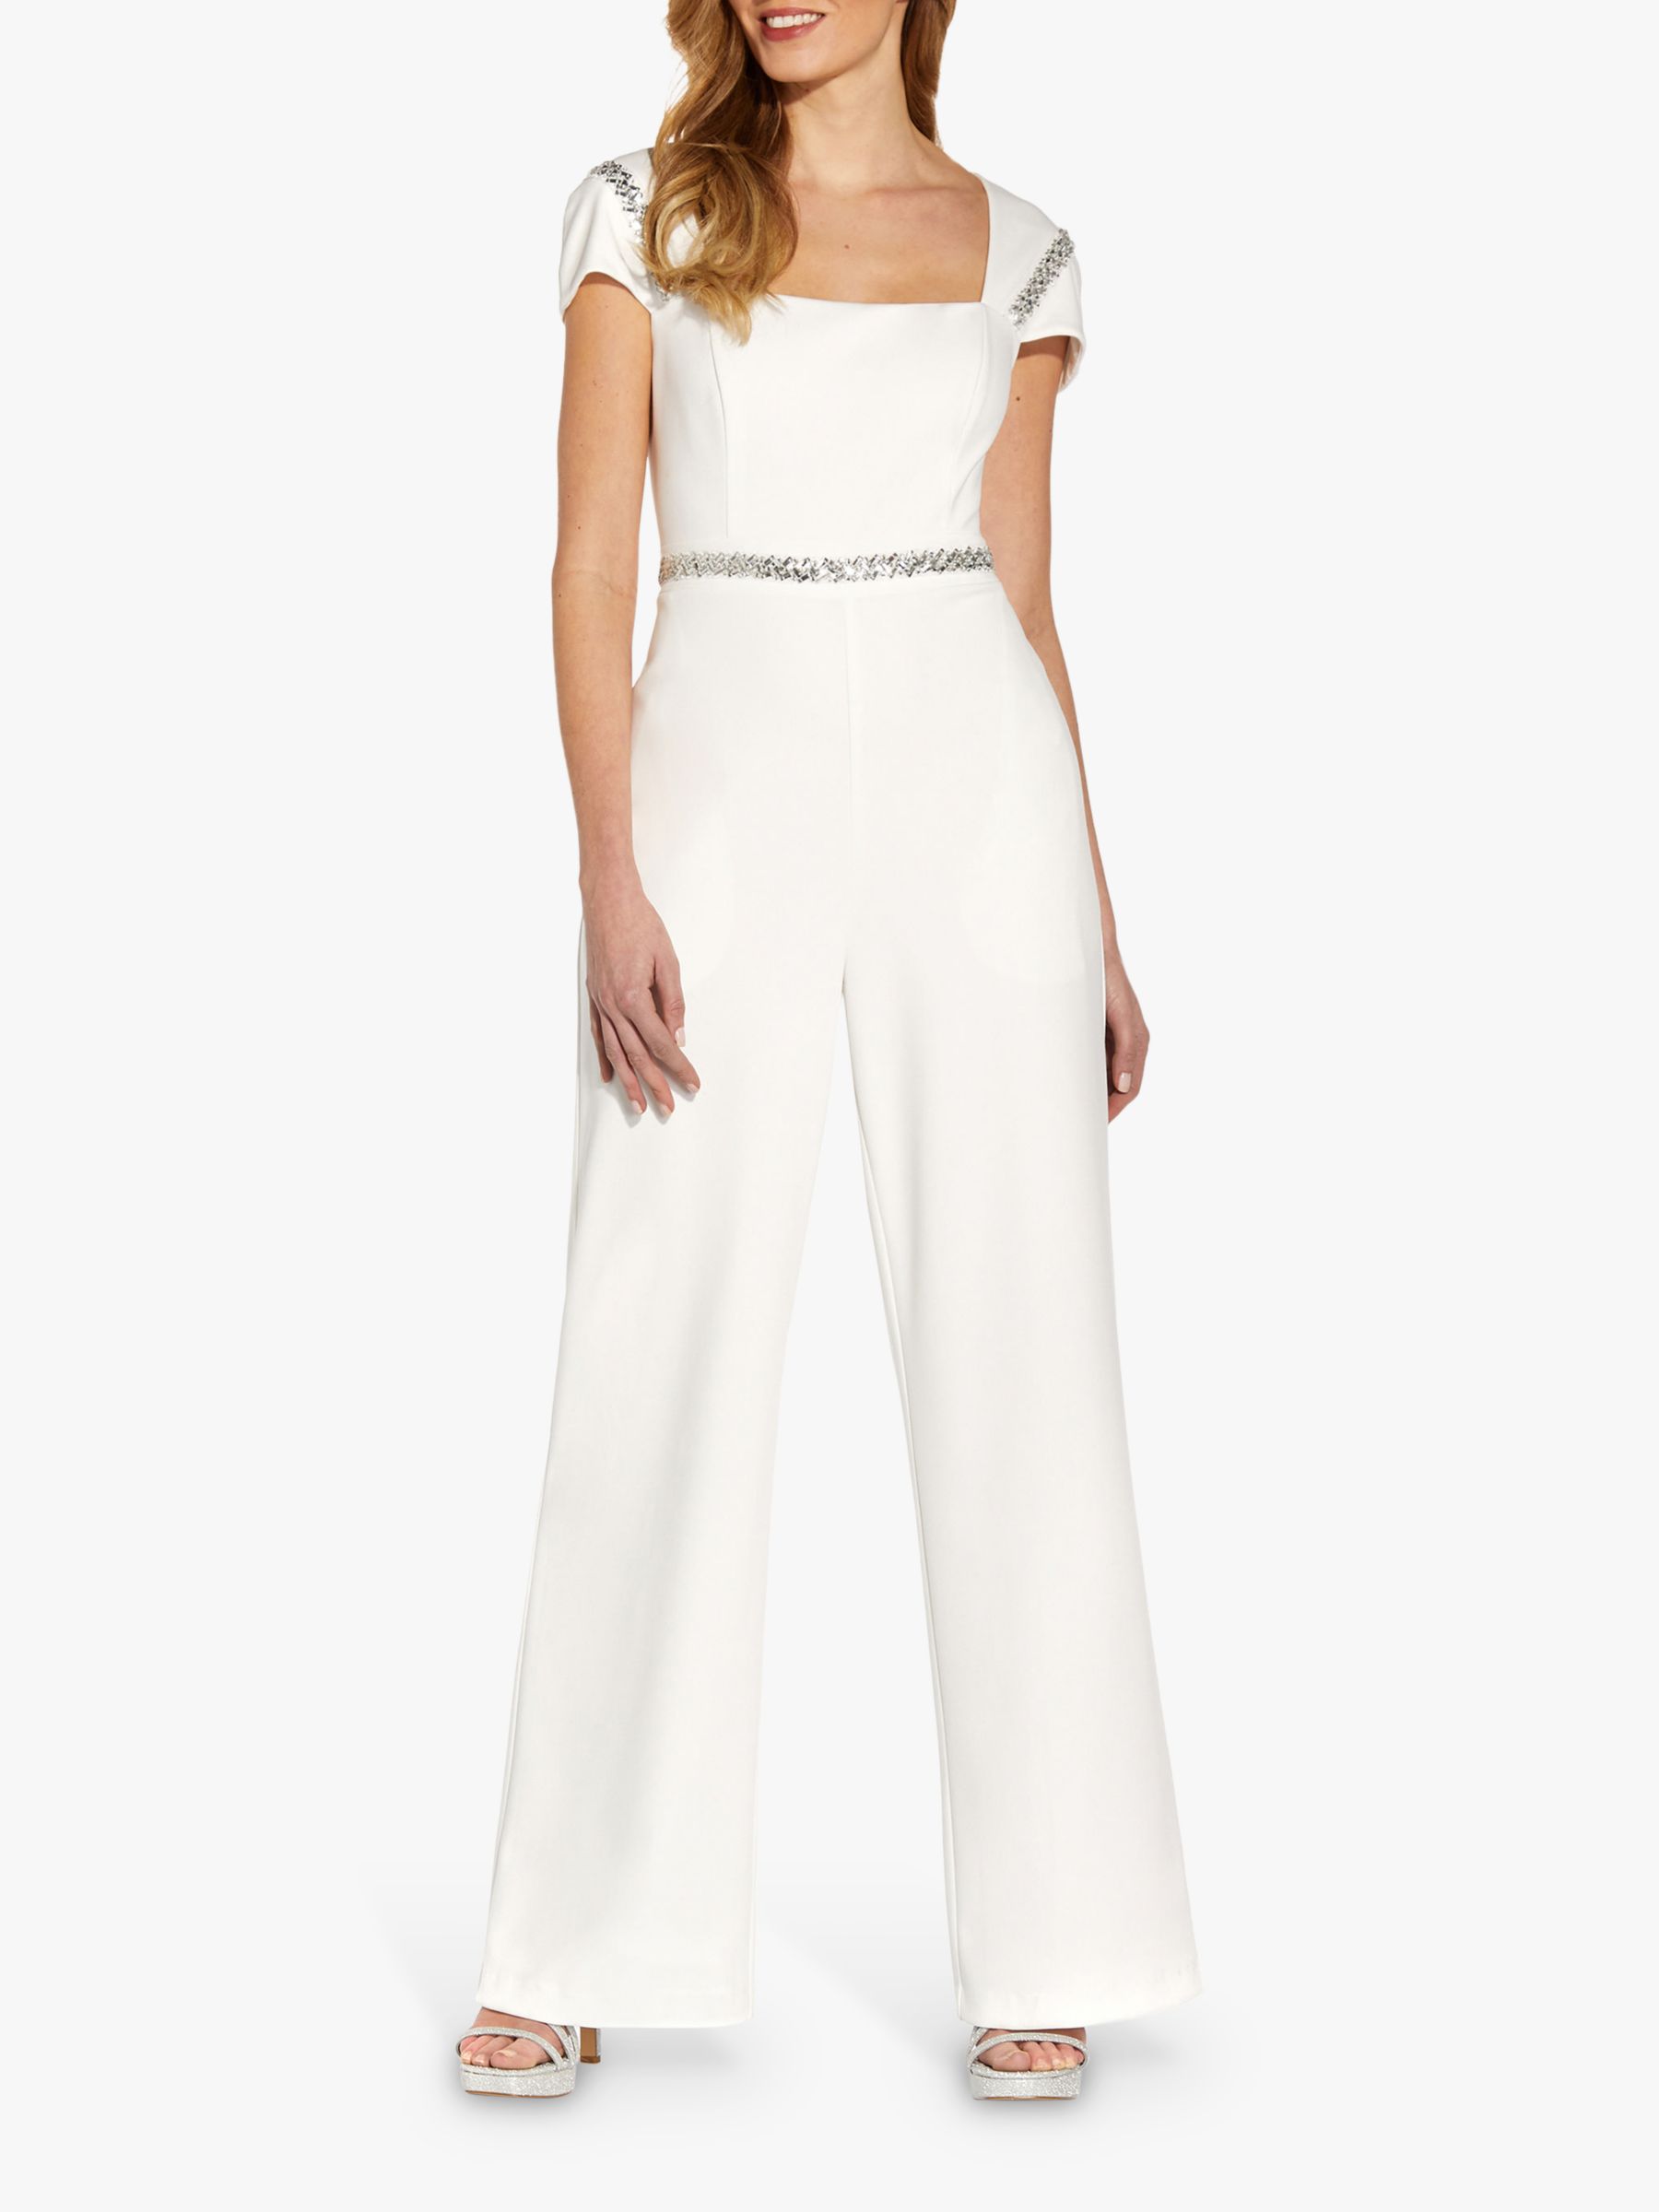 Adrianna Papell Beaded Crepe Jumpsuit, Ivory at John Lewis & Partners